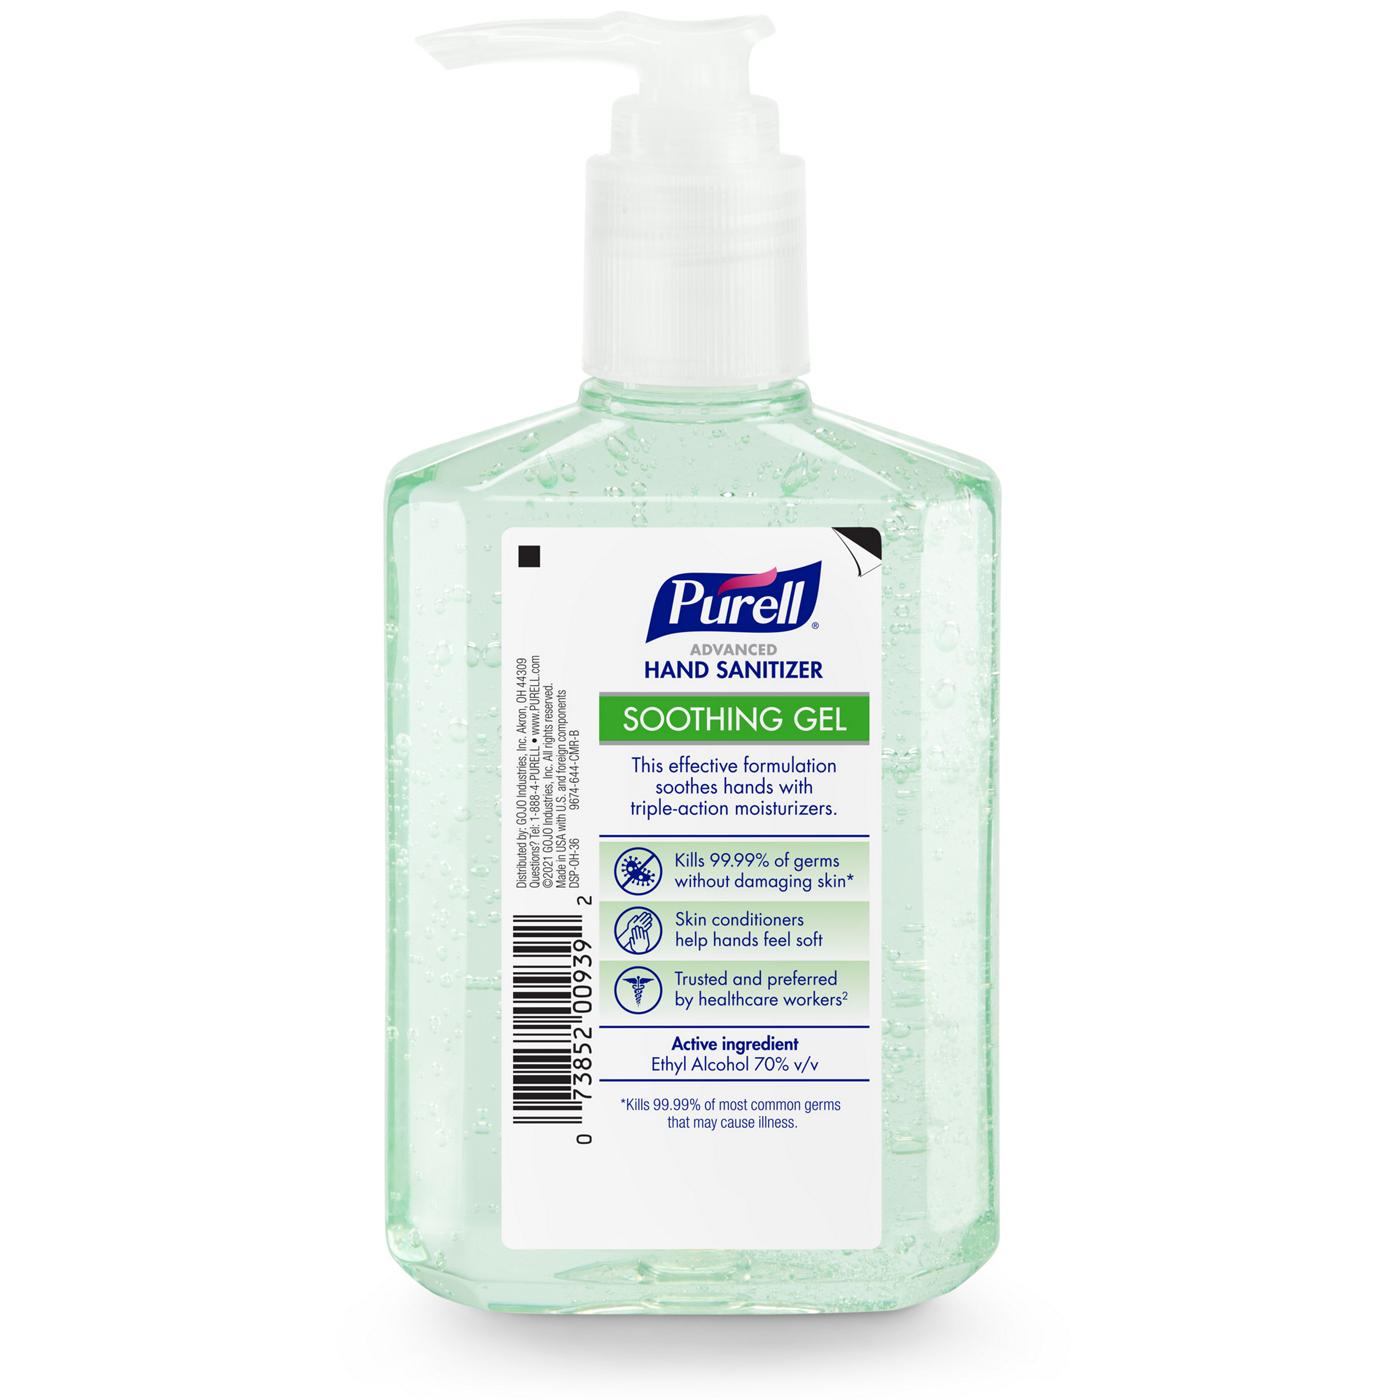 Purell Advanced Hand Sanitizer - Soothing Gel; image 5 of 5